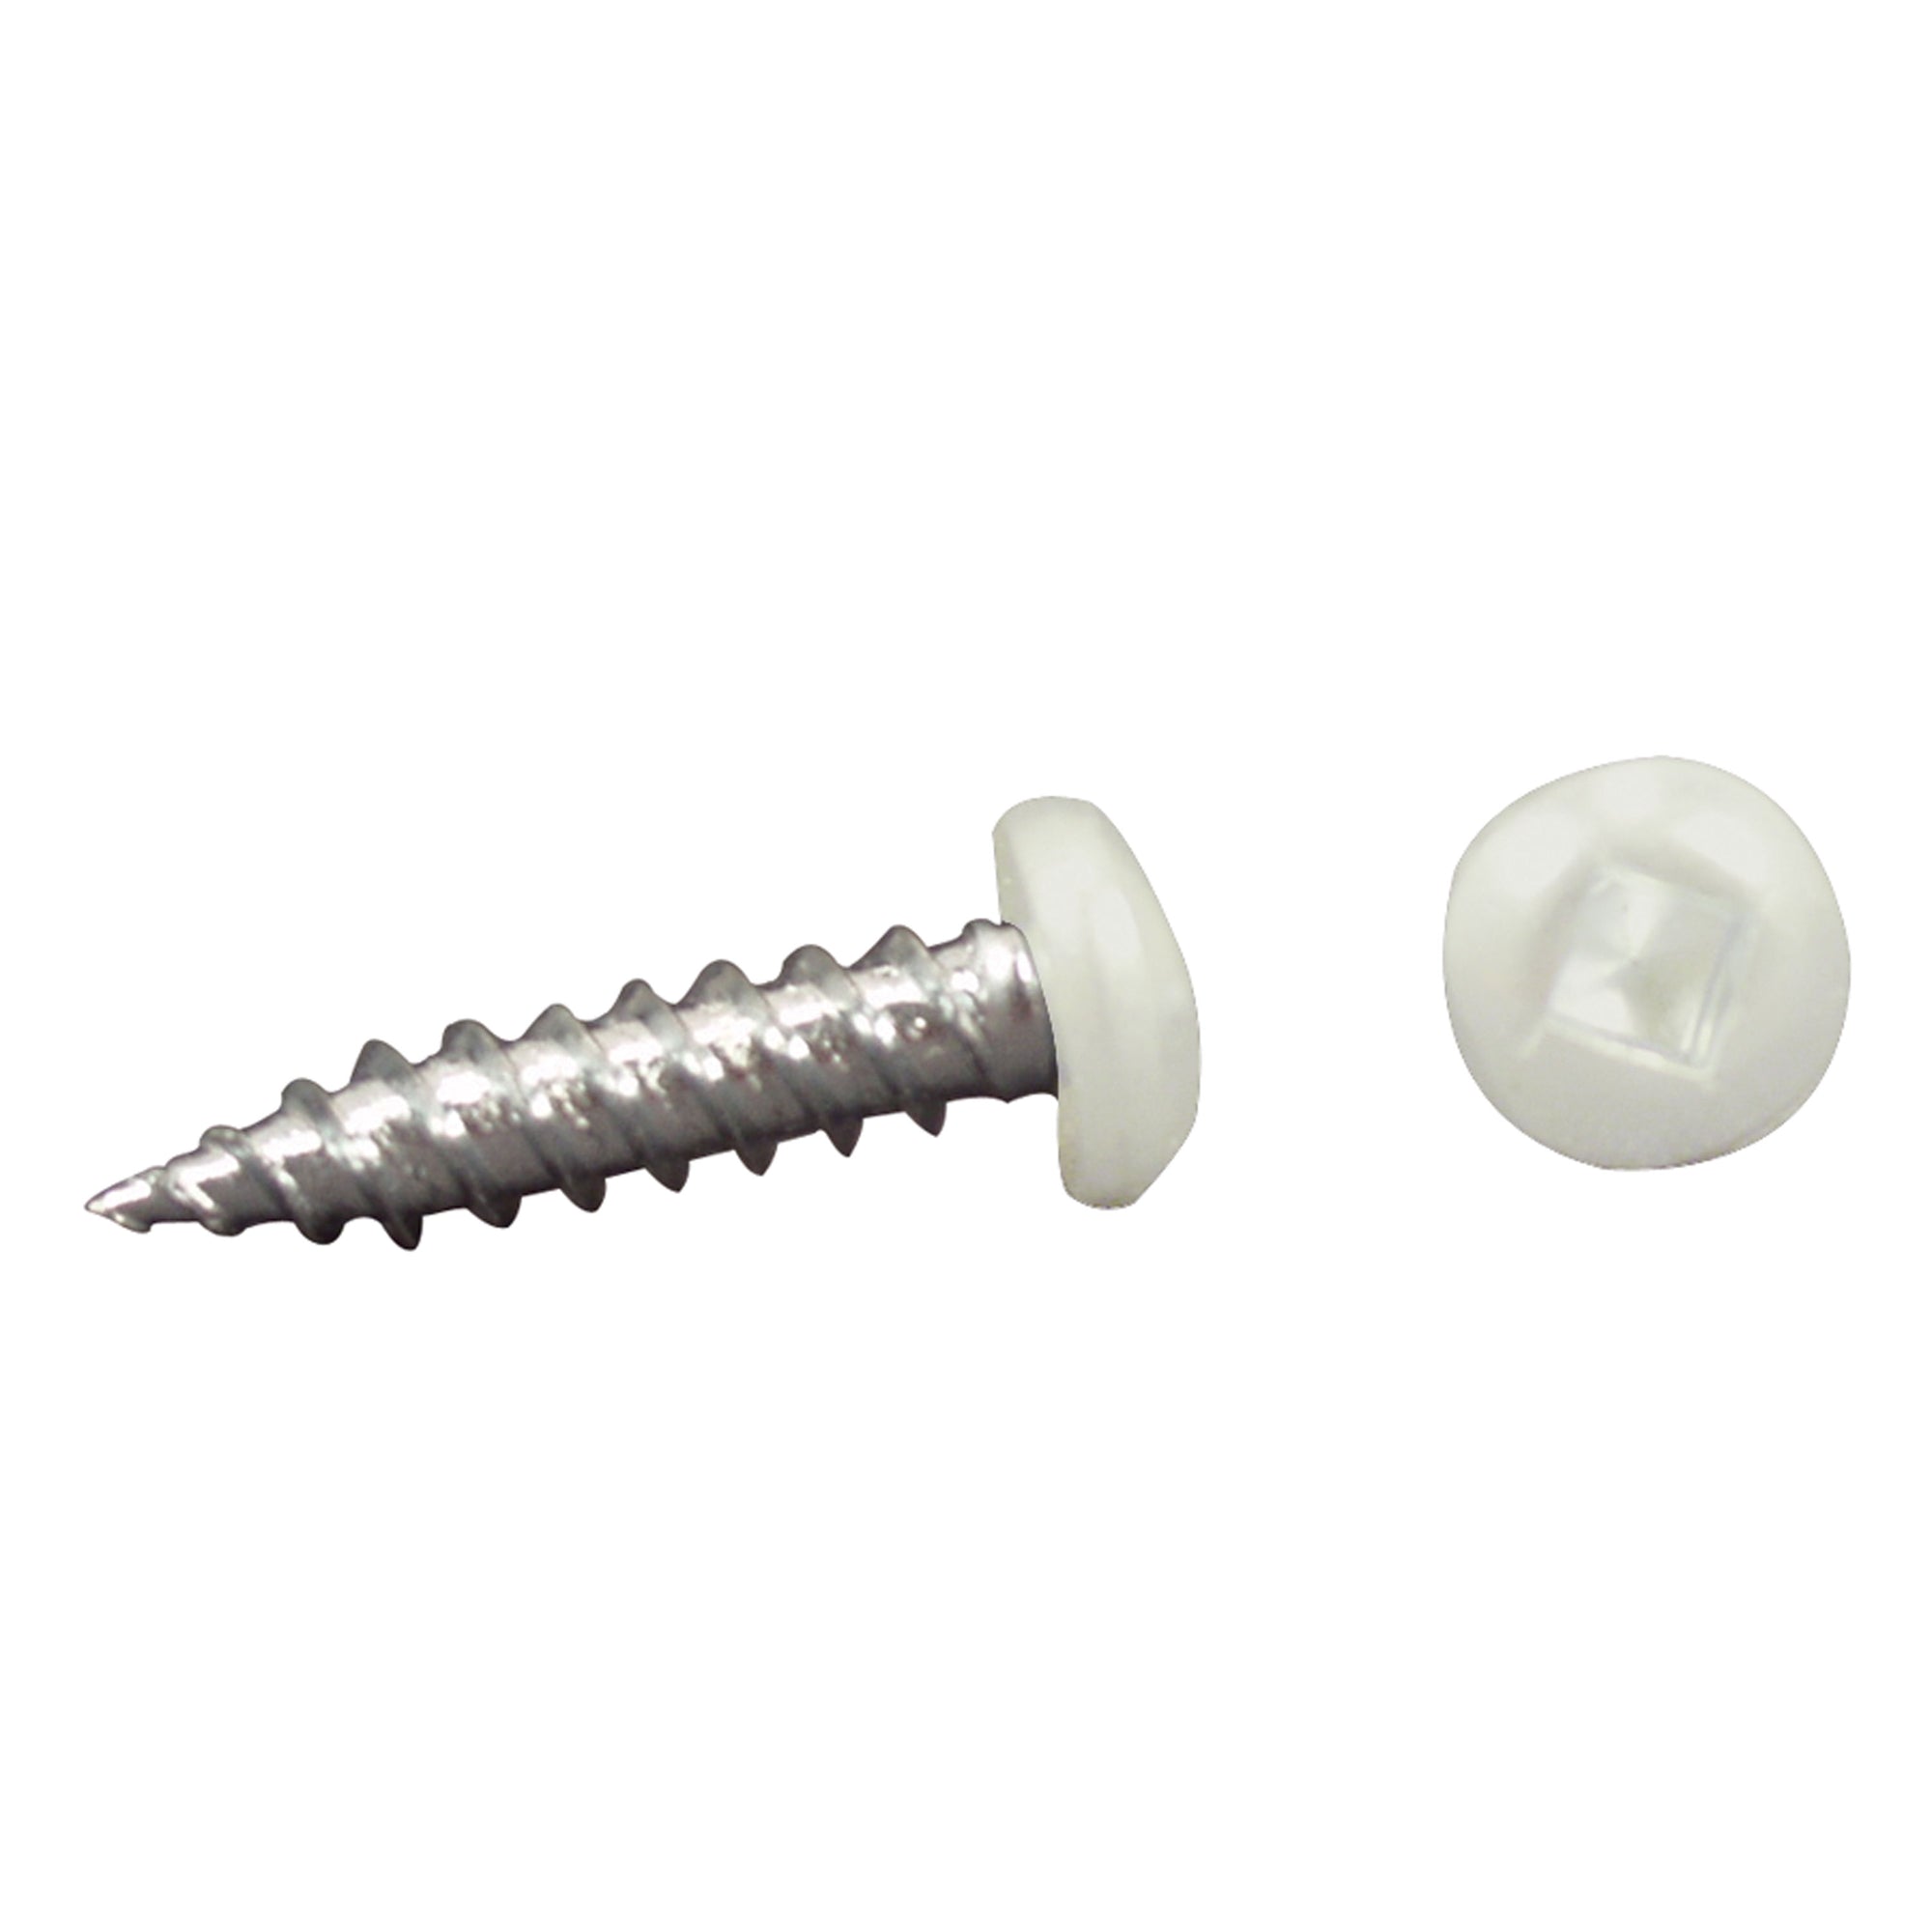 AP Products 012-PSQ500 W 8 X 1-1/2 Pan Head Square Recess Screw - #8 x 1.5", White, Pack of 500